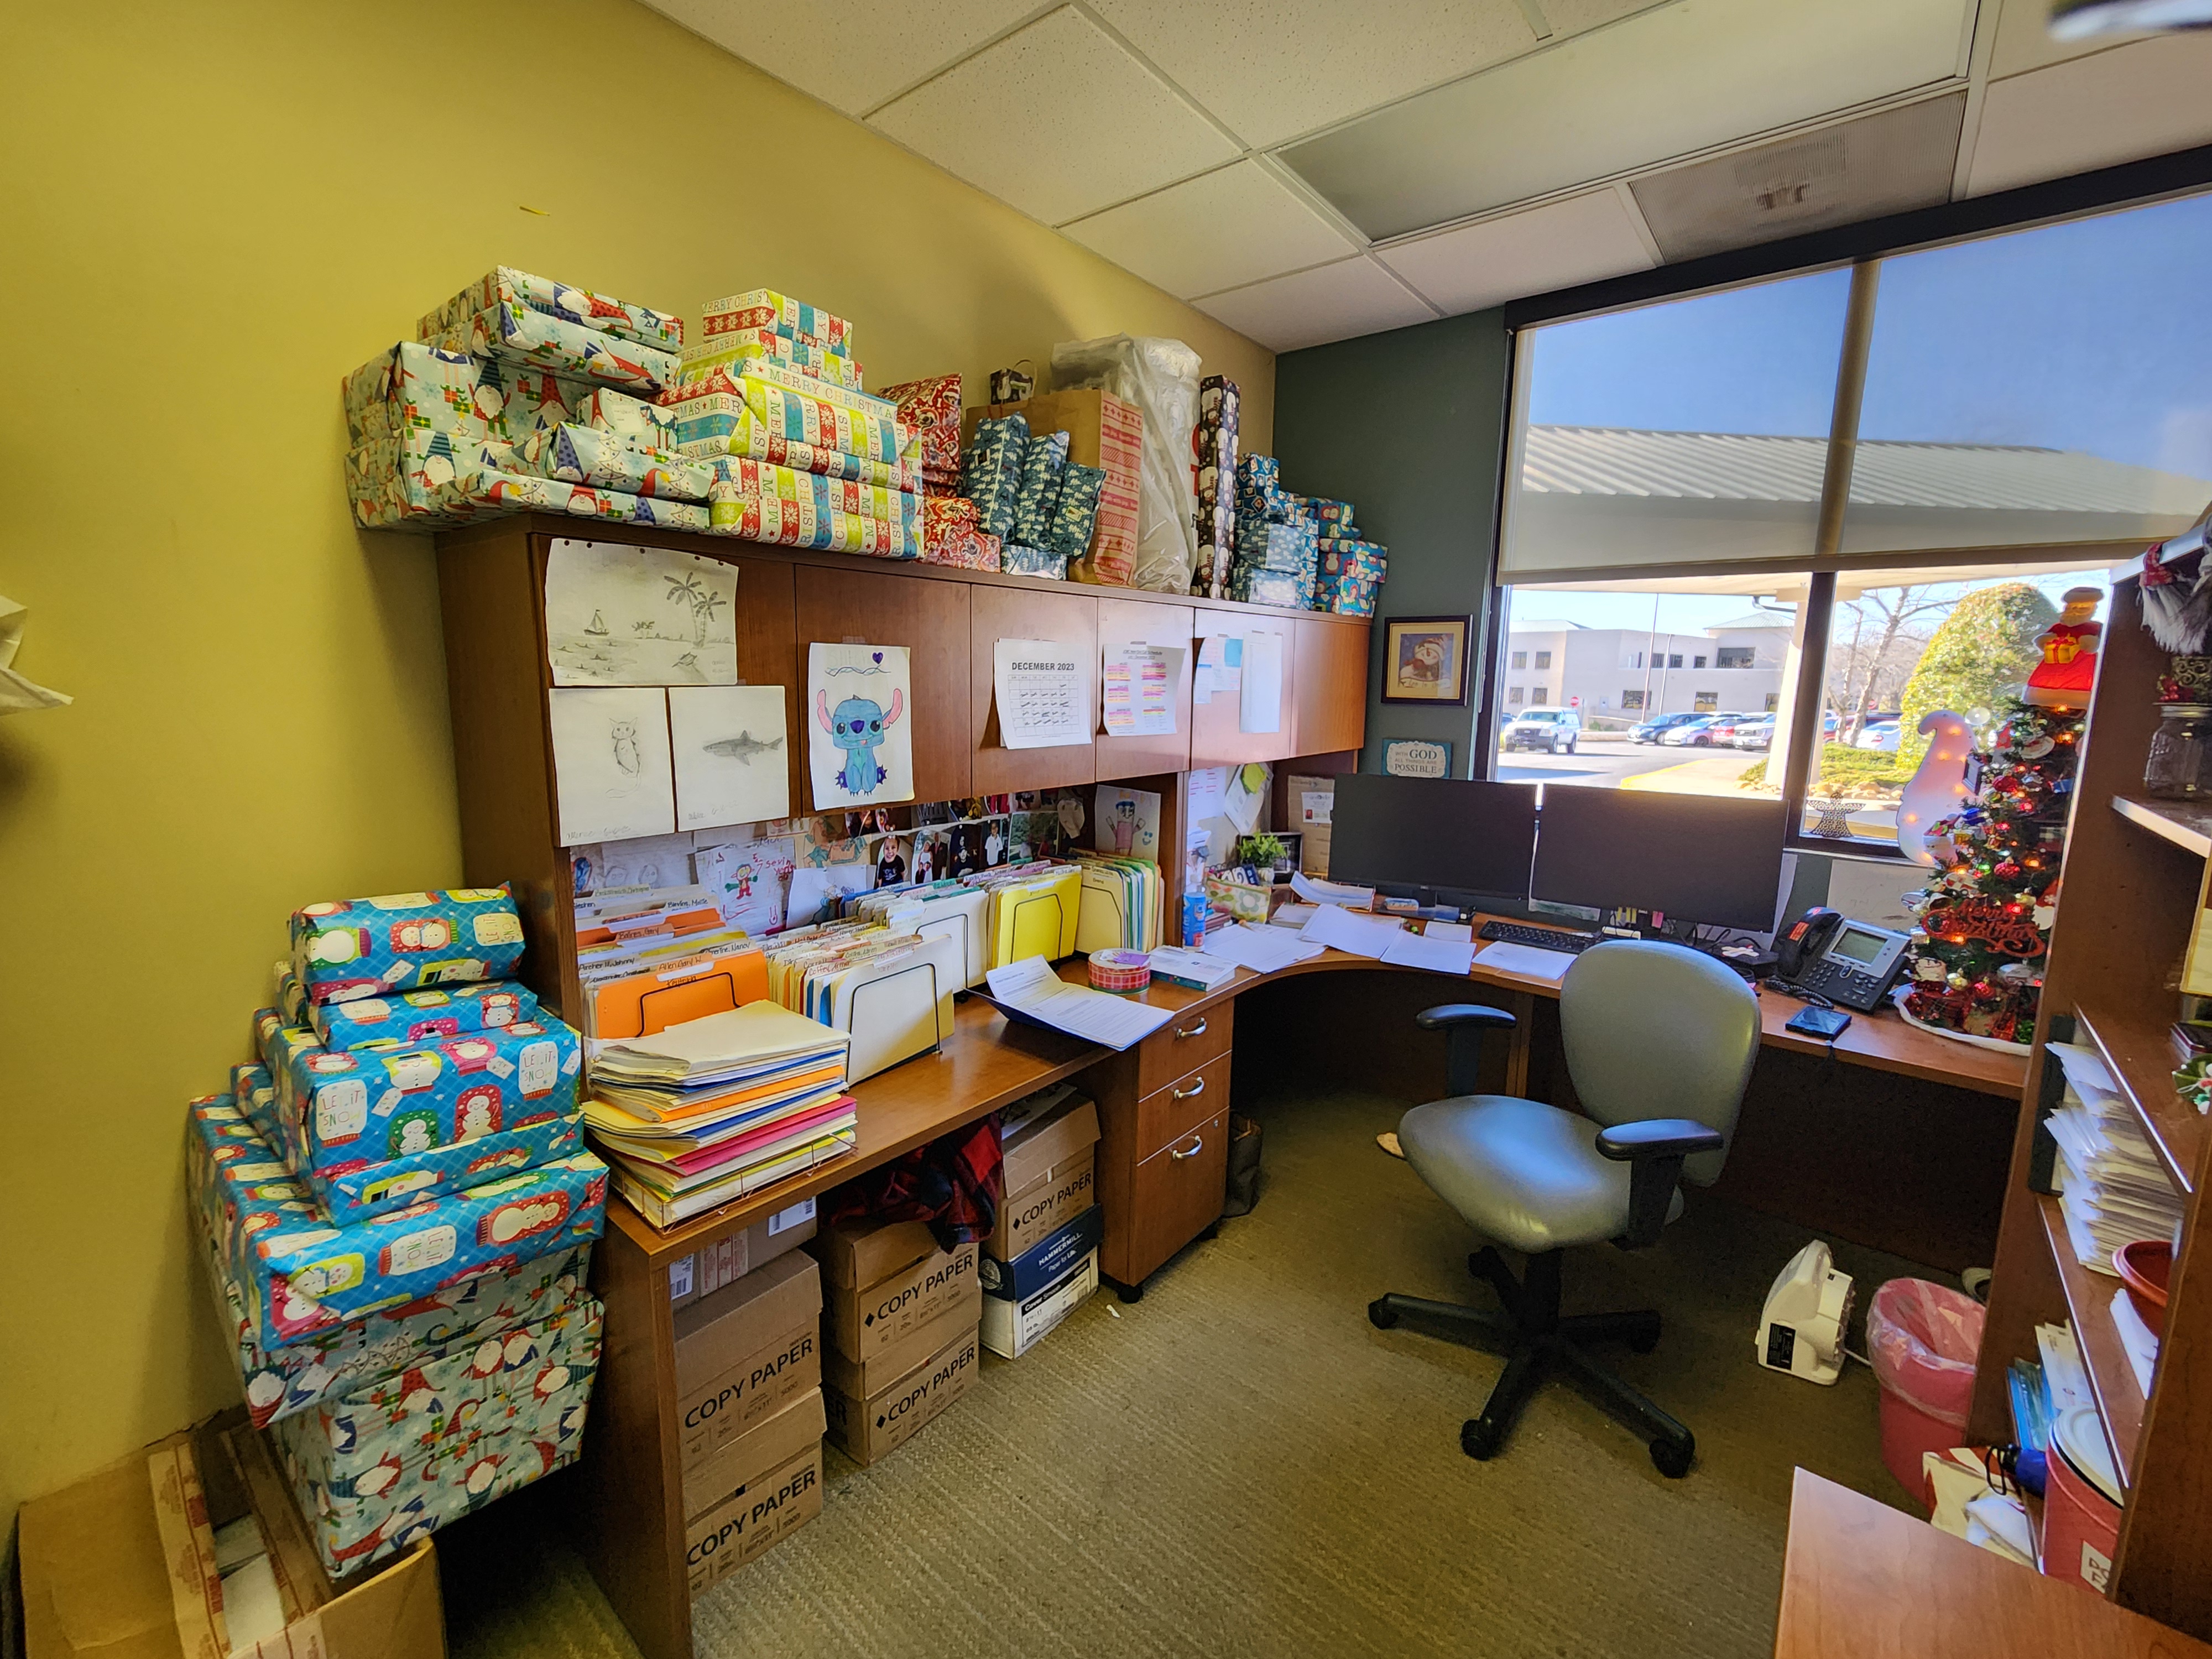 Holiday Traditions Contribute to a Positive Workplace Culture